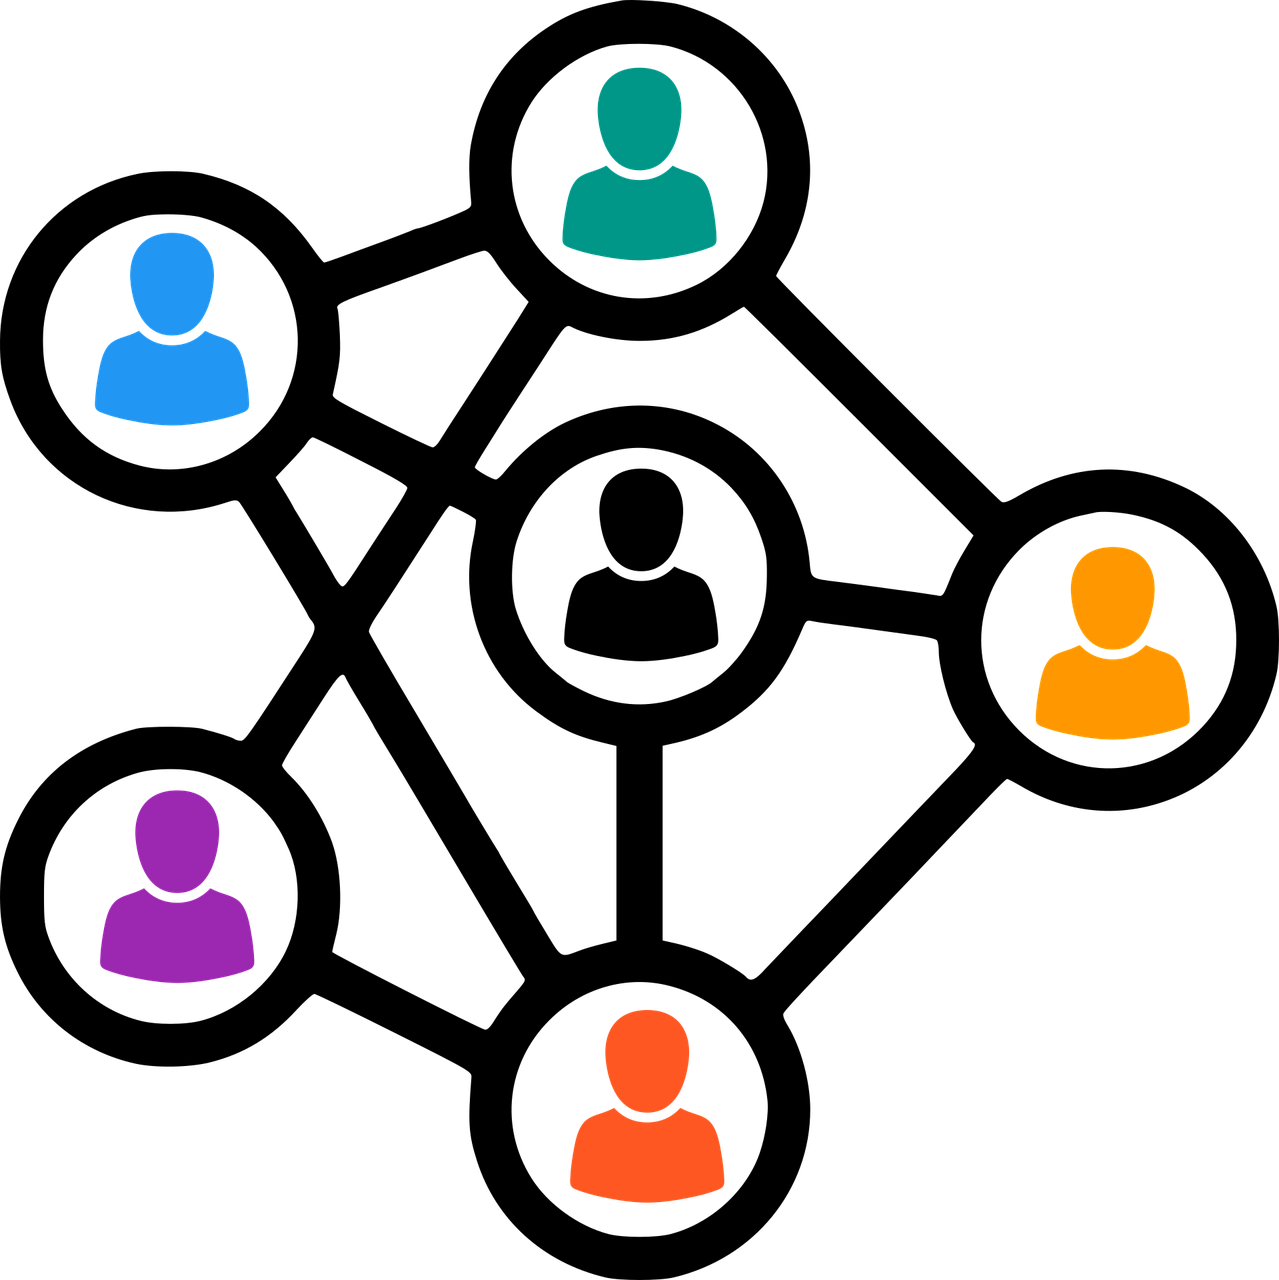 Graphic representation of six stylized human figures in various colors arranged in a network.